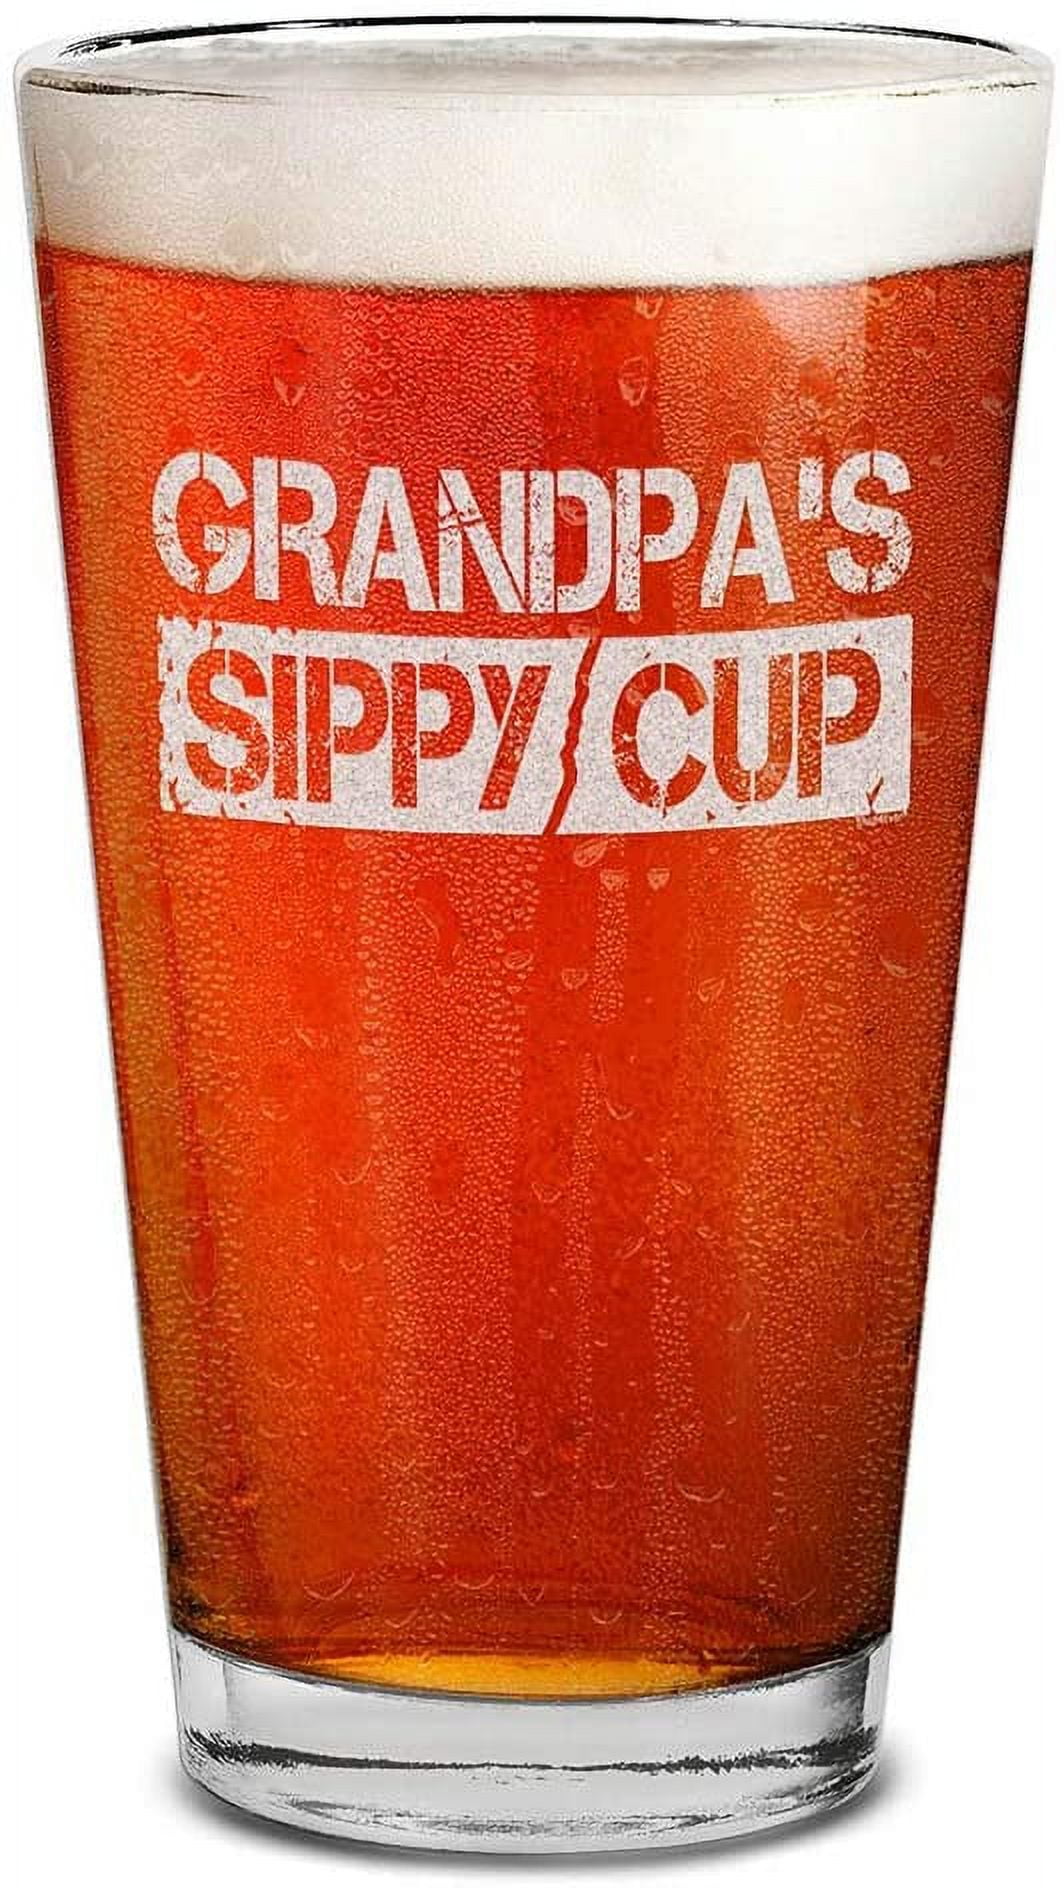 Beer Sippy Cup - Gent Supply Co.